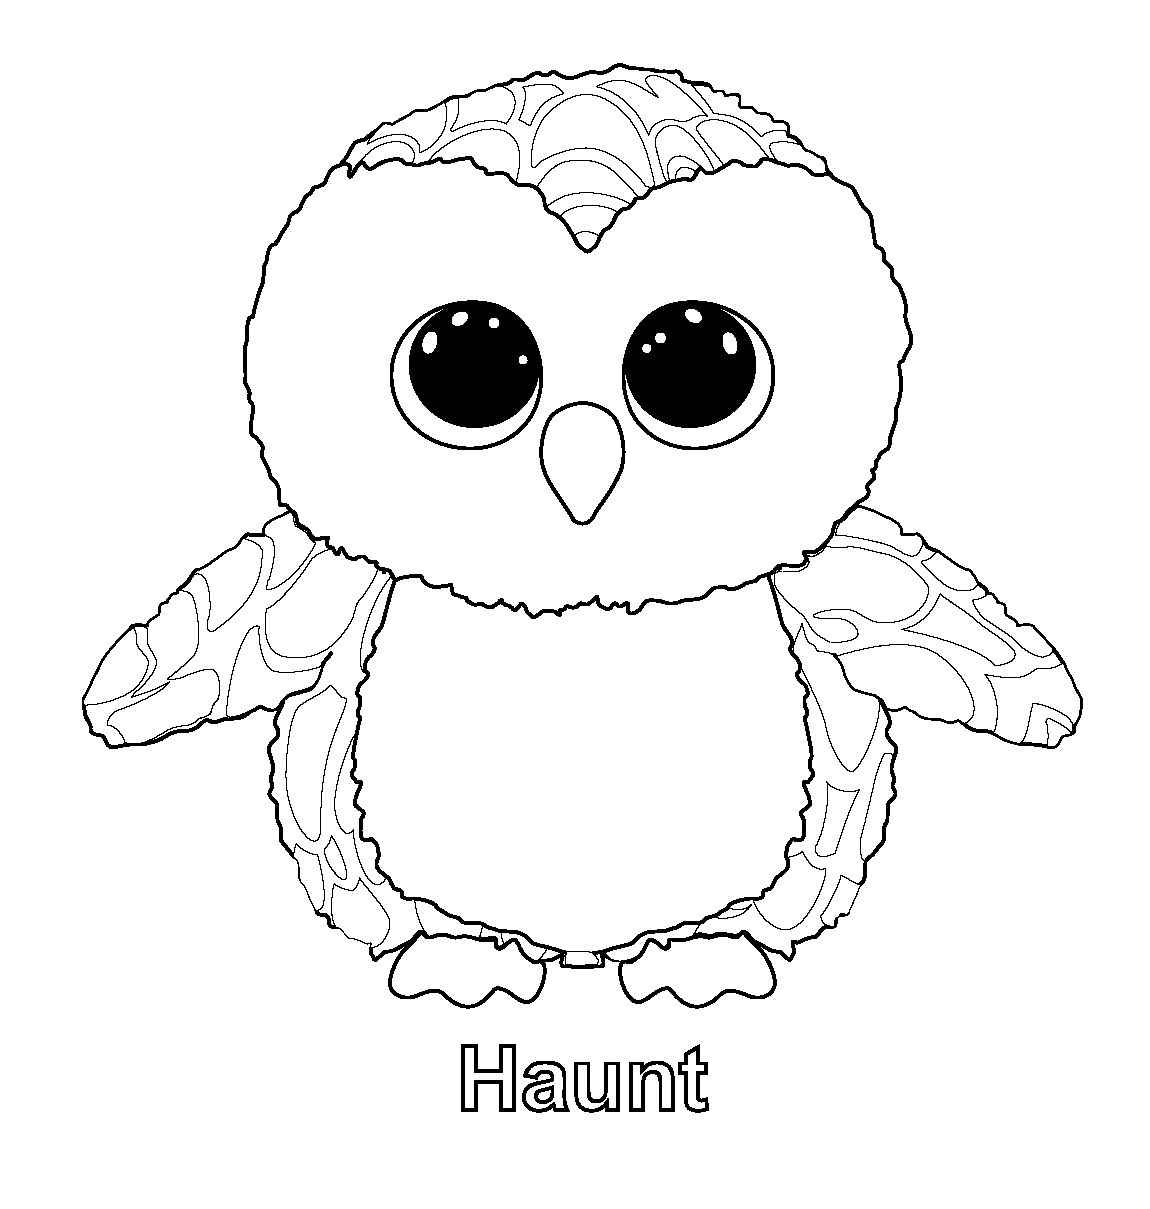 Haunt Beanie Boos Coloring Page